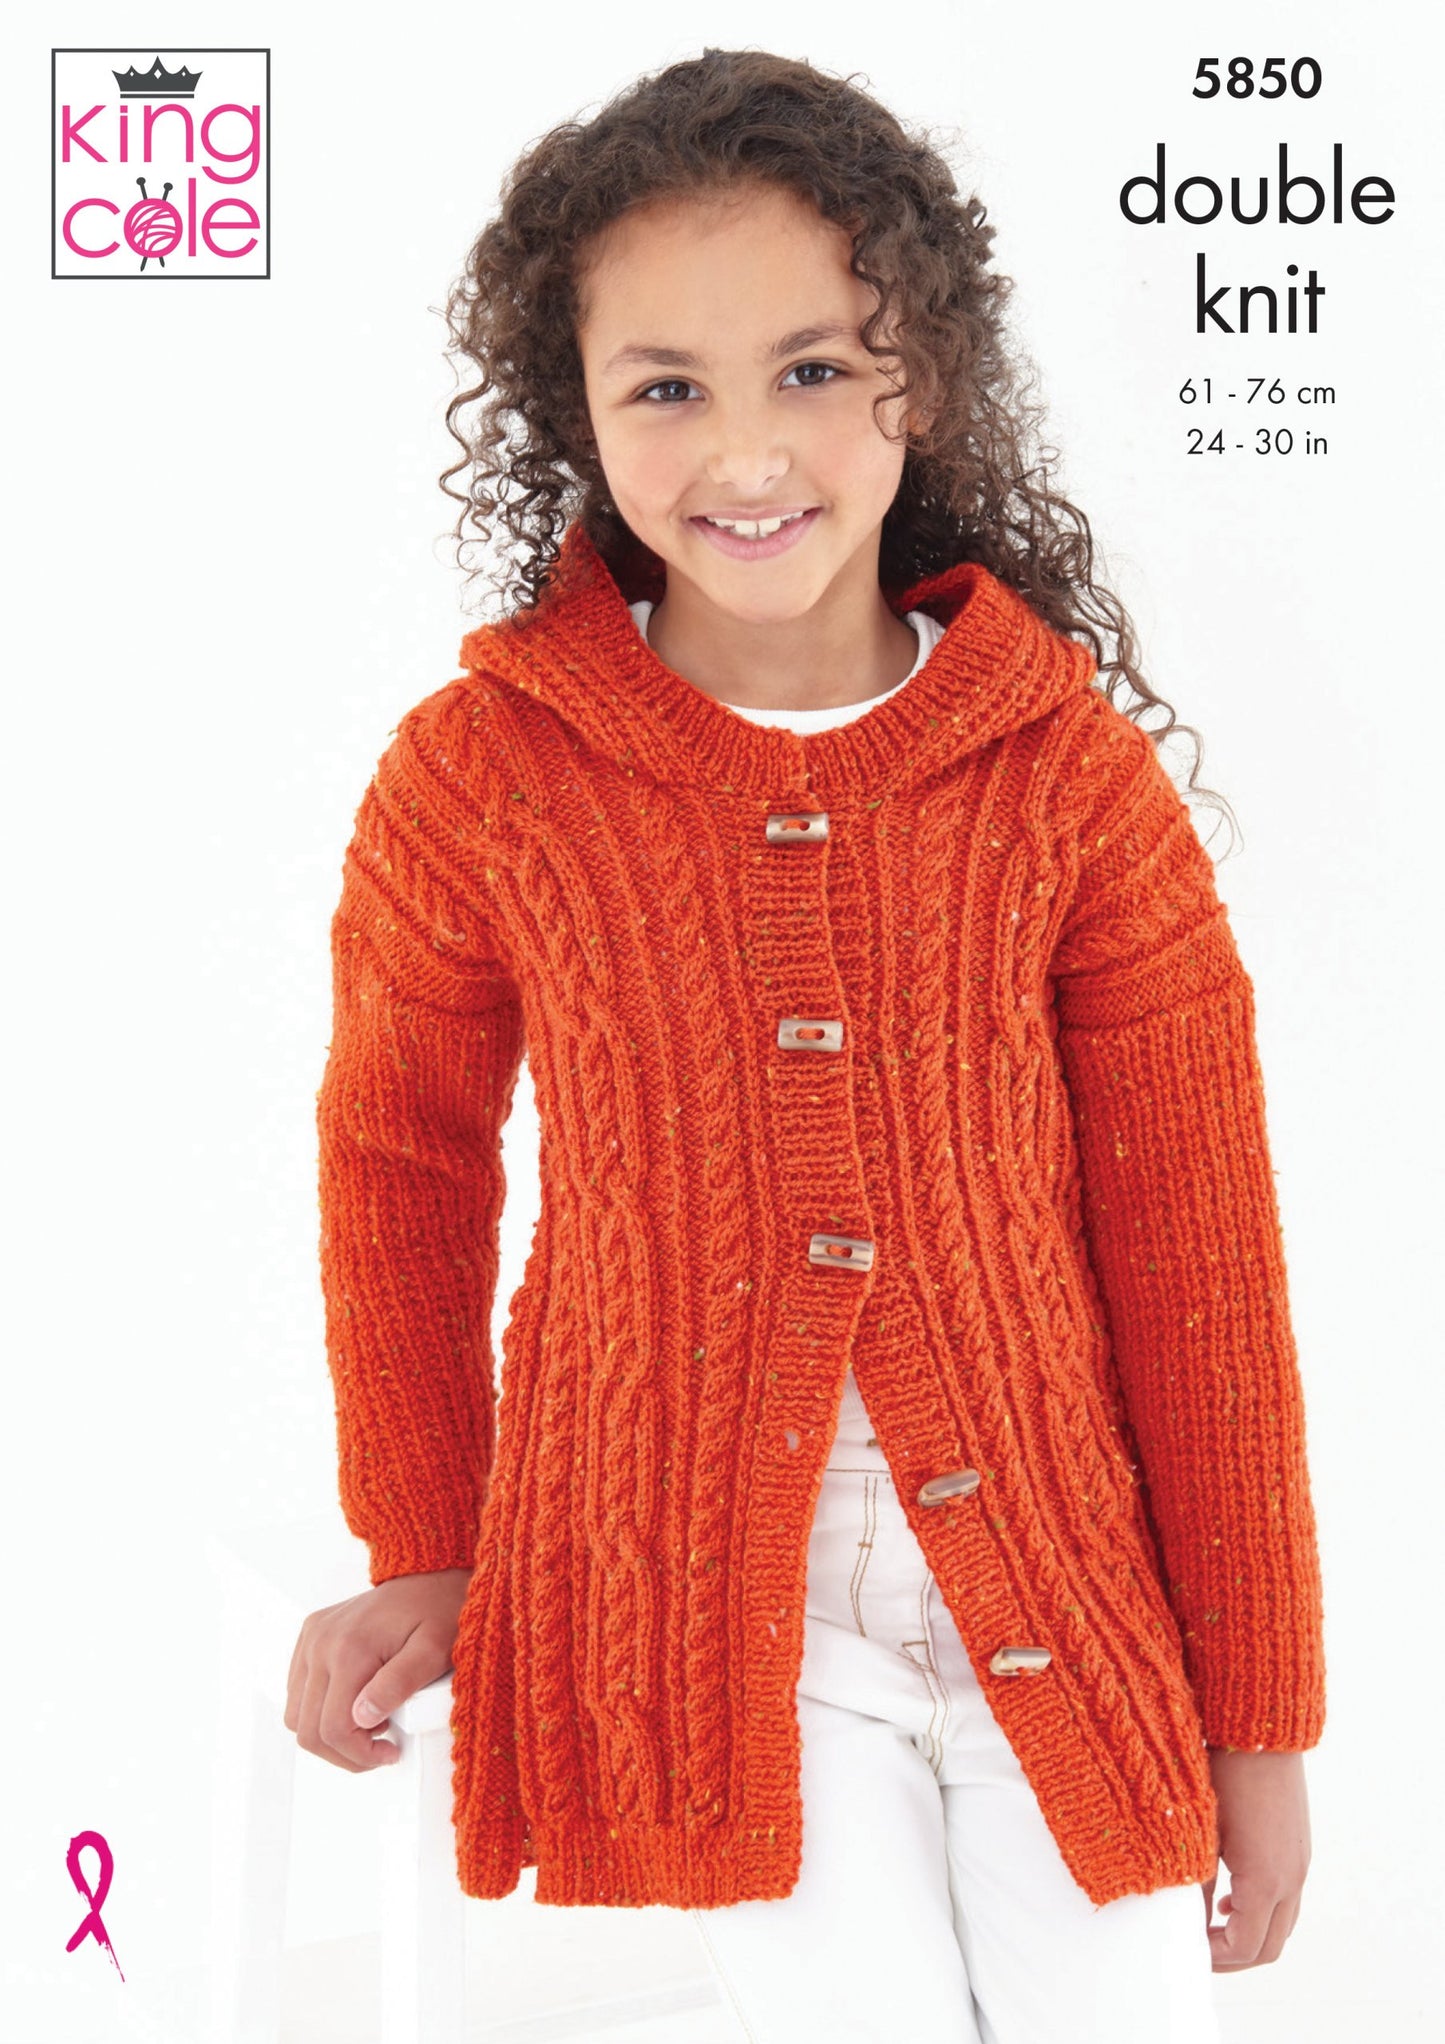 Knitting Pattern 5850 - Cardigan & Sweater Knitted in Big Value Tweed DK